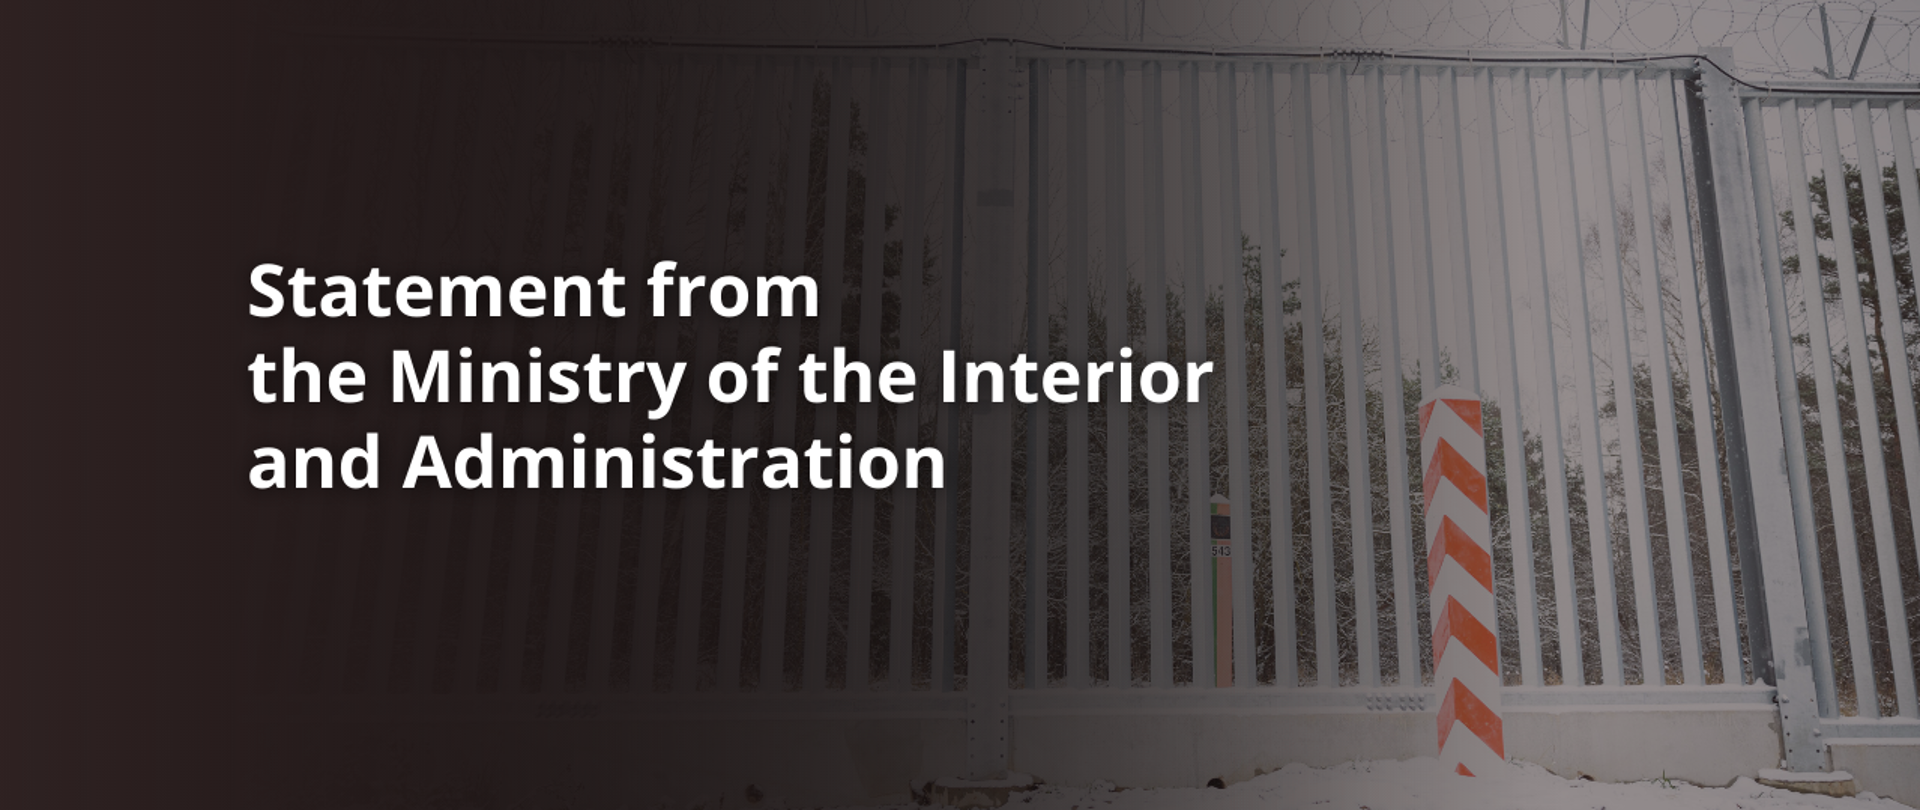 Statement from the Ministry of the Interior and Administration